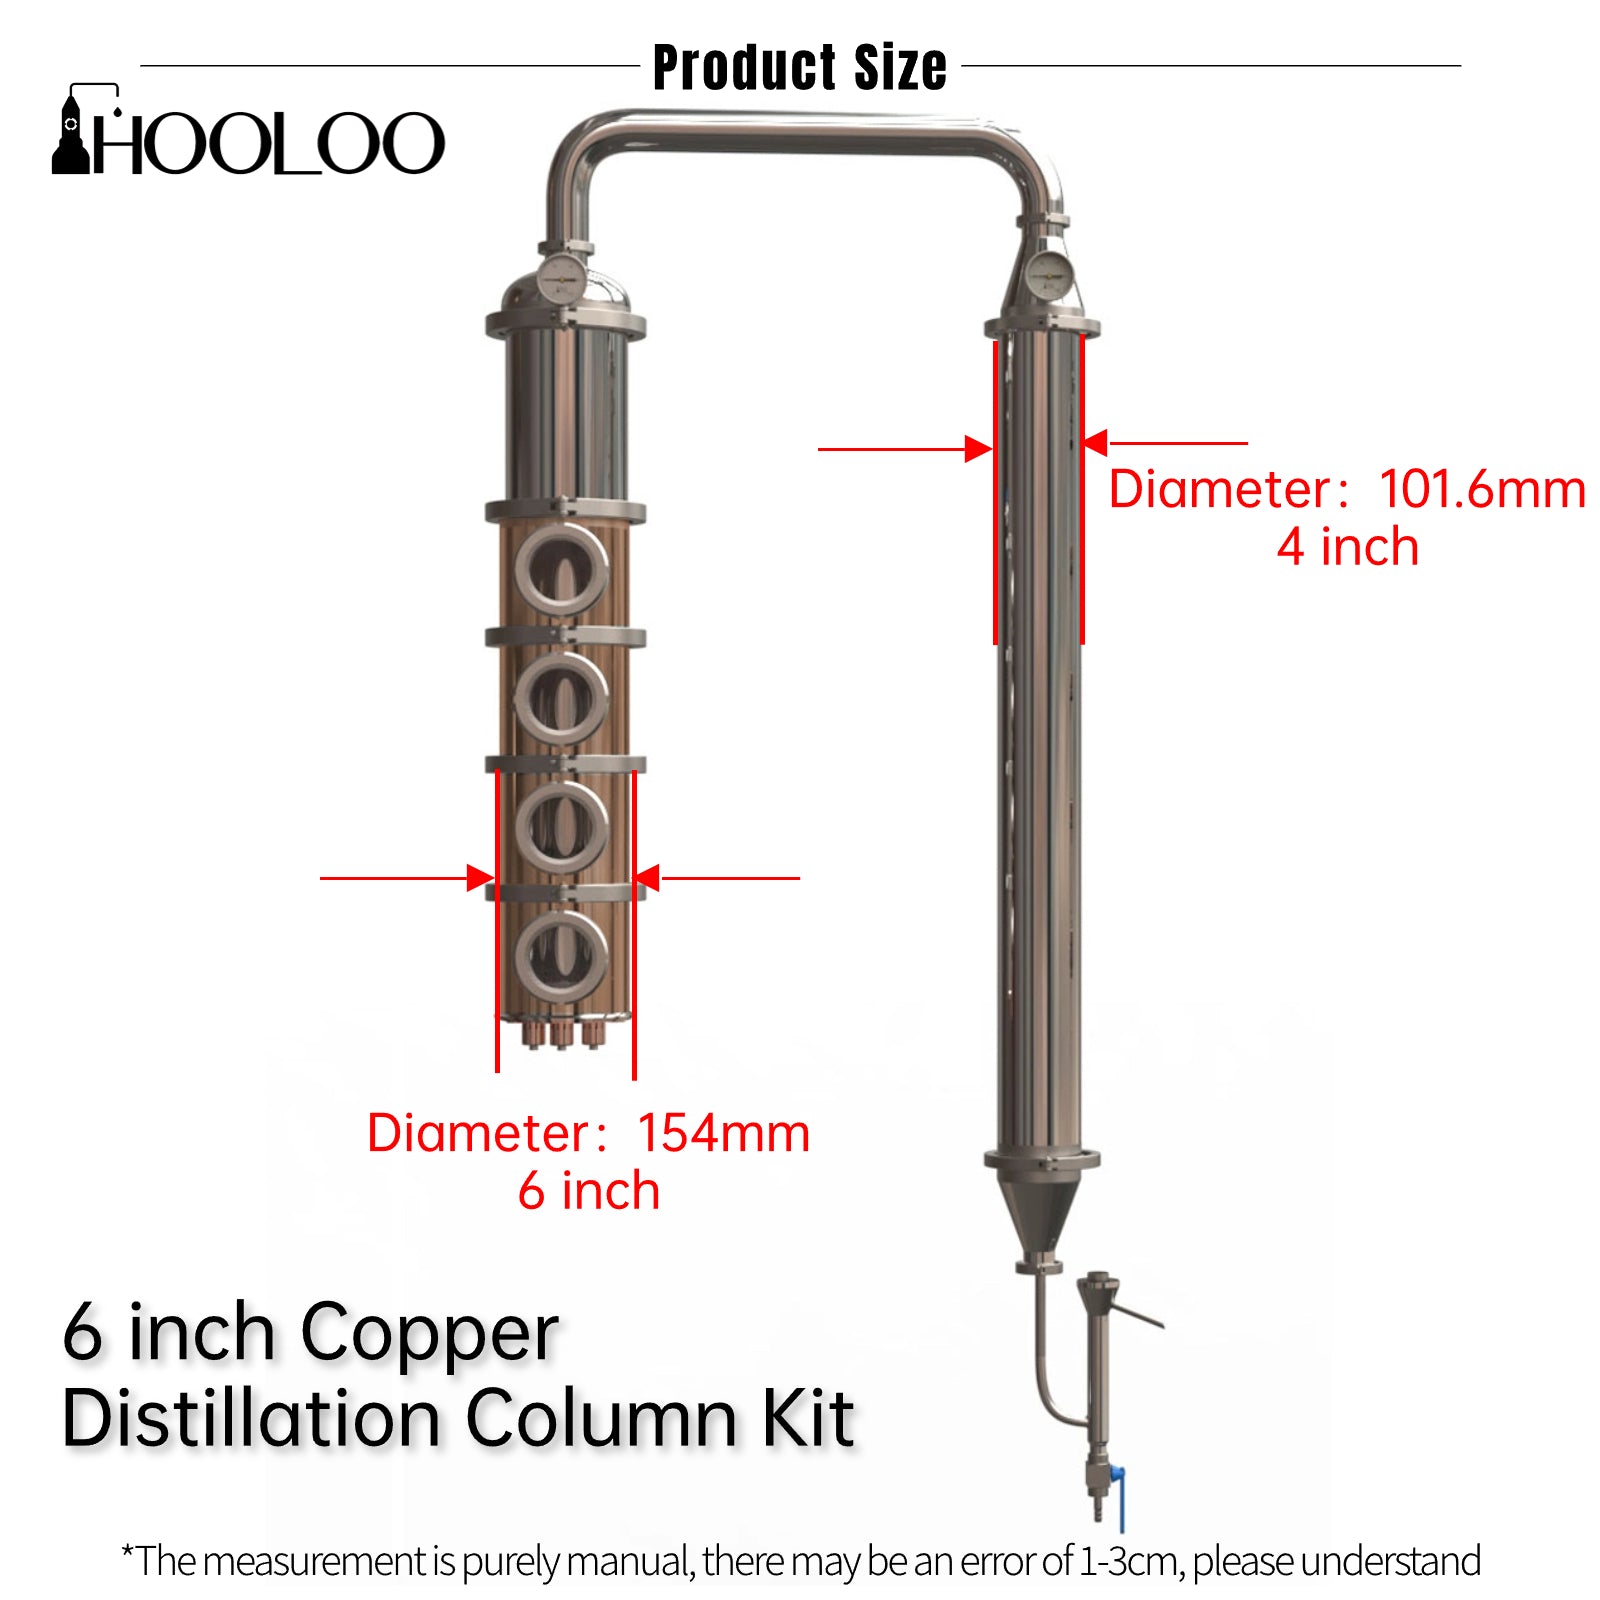 6 inch Crystal Glass/Stainless Steel/Copper Column Kit - Hooloo Distilling Equipment Supply